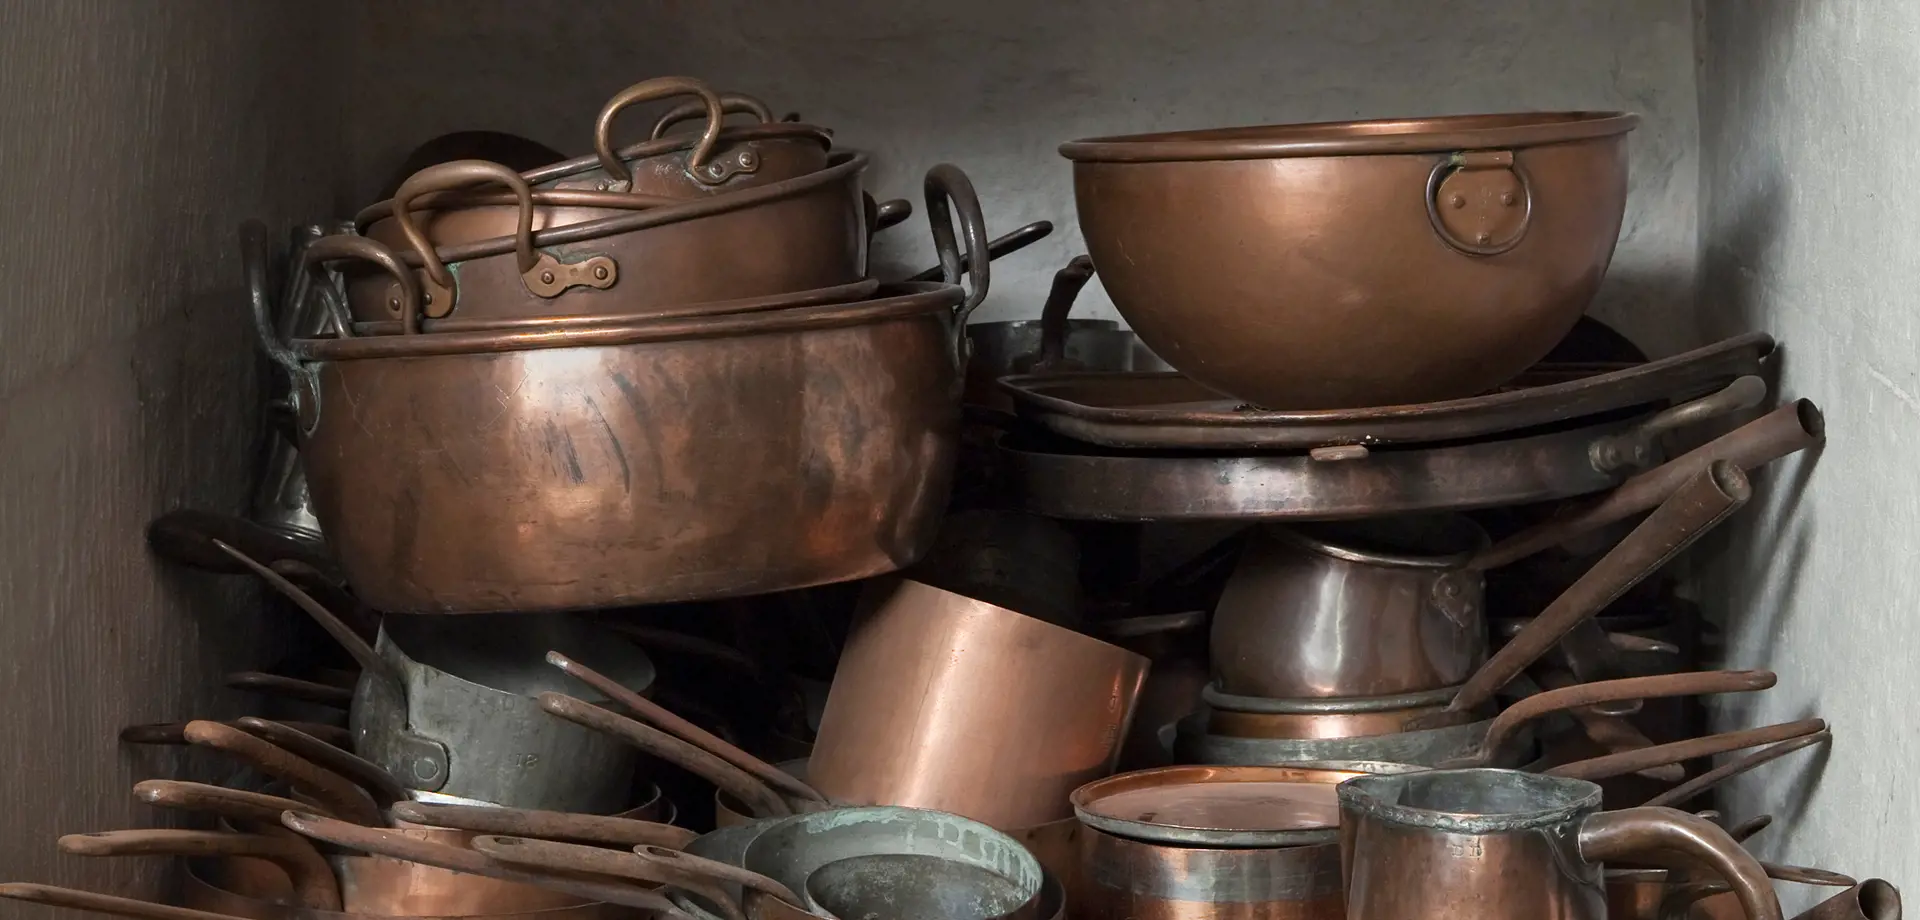 Copper cooking equipment and utensils